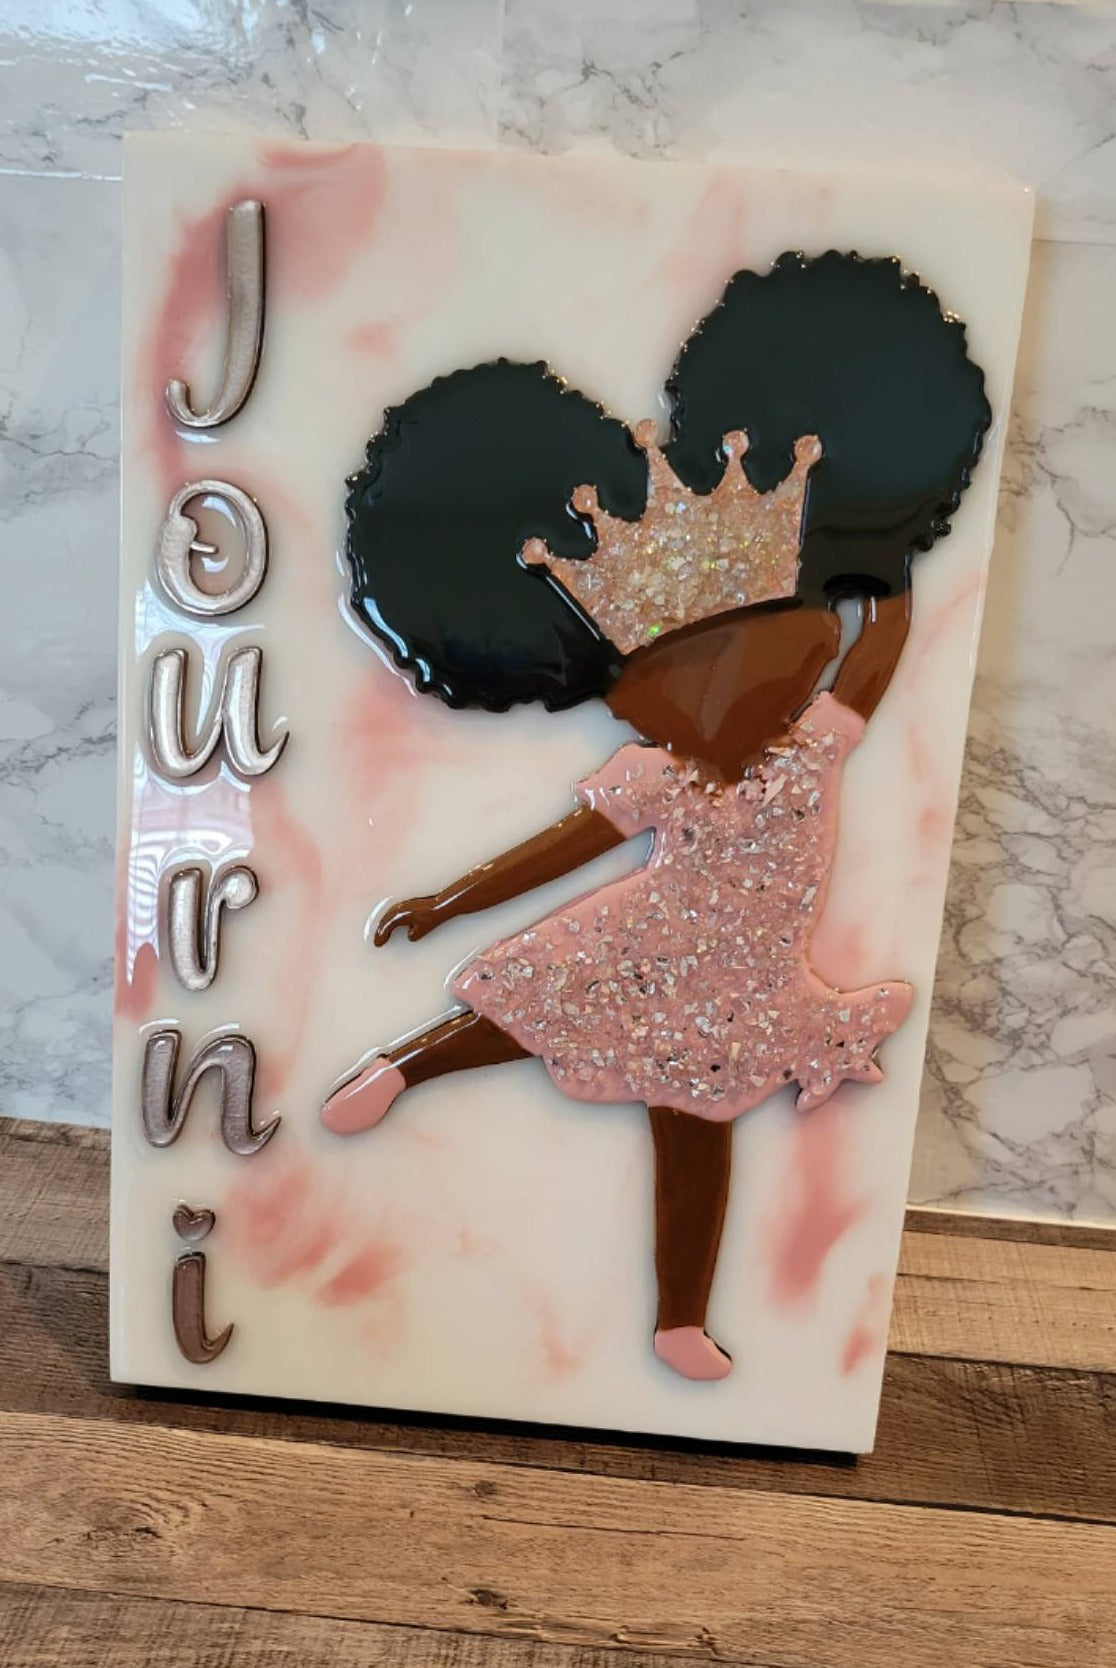 Little ballerina resin painting black girl with afro puffs, pink crushed glass dress. Says the name Journi on the side